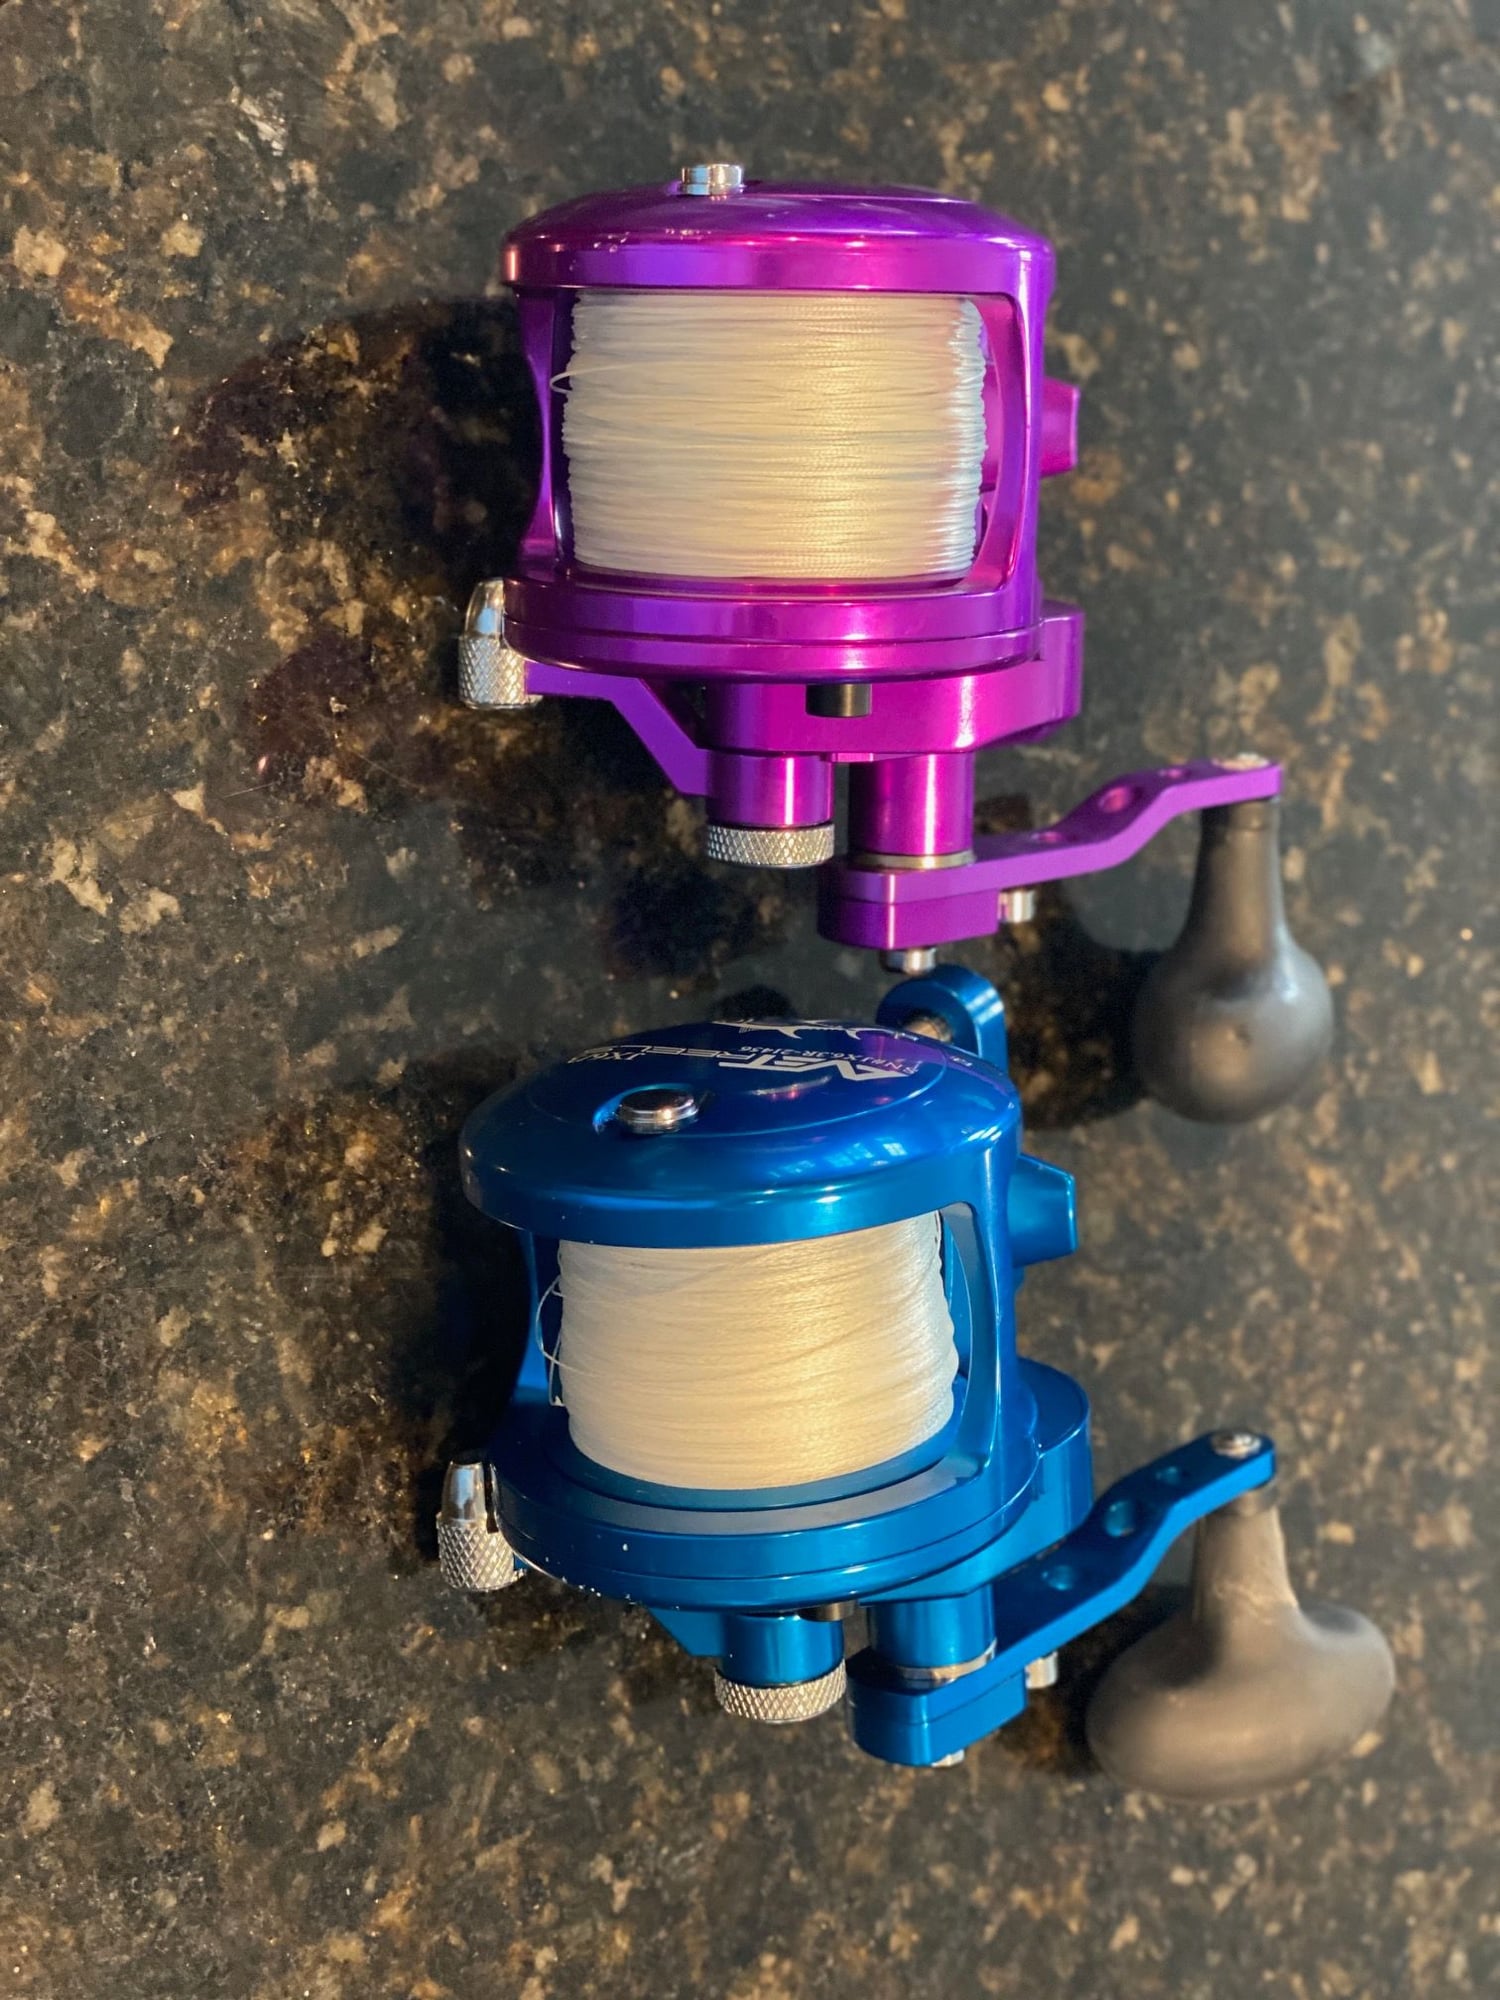 Avet jx 6/3 two speed reel for sale - The Hull Truth - Boating and Fishing  Forum